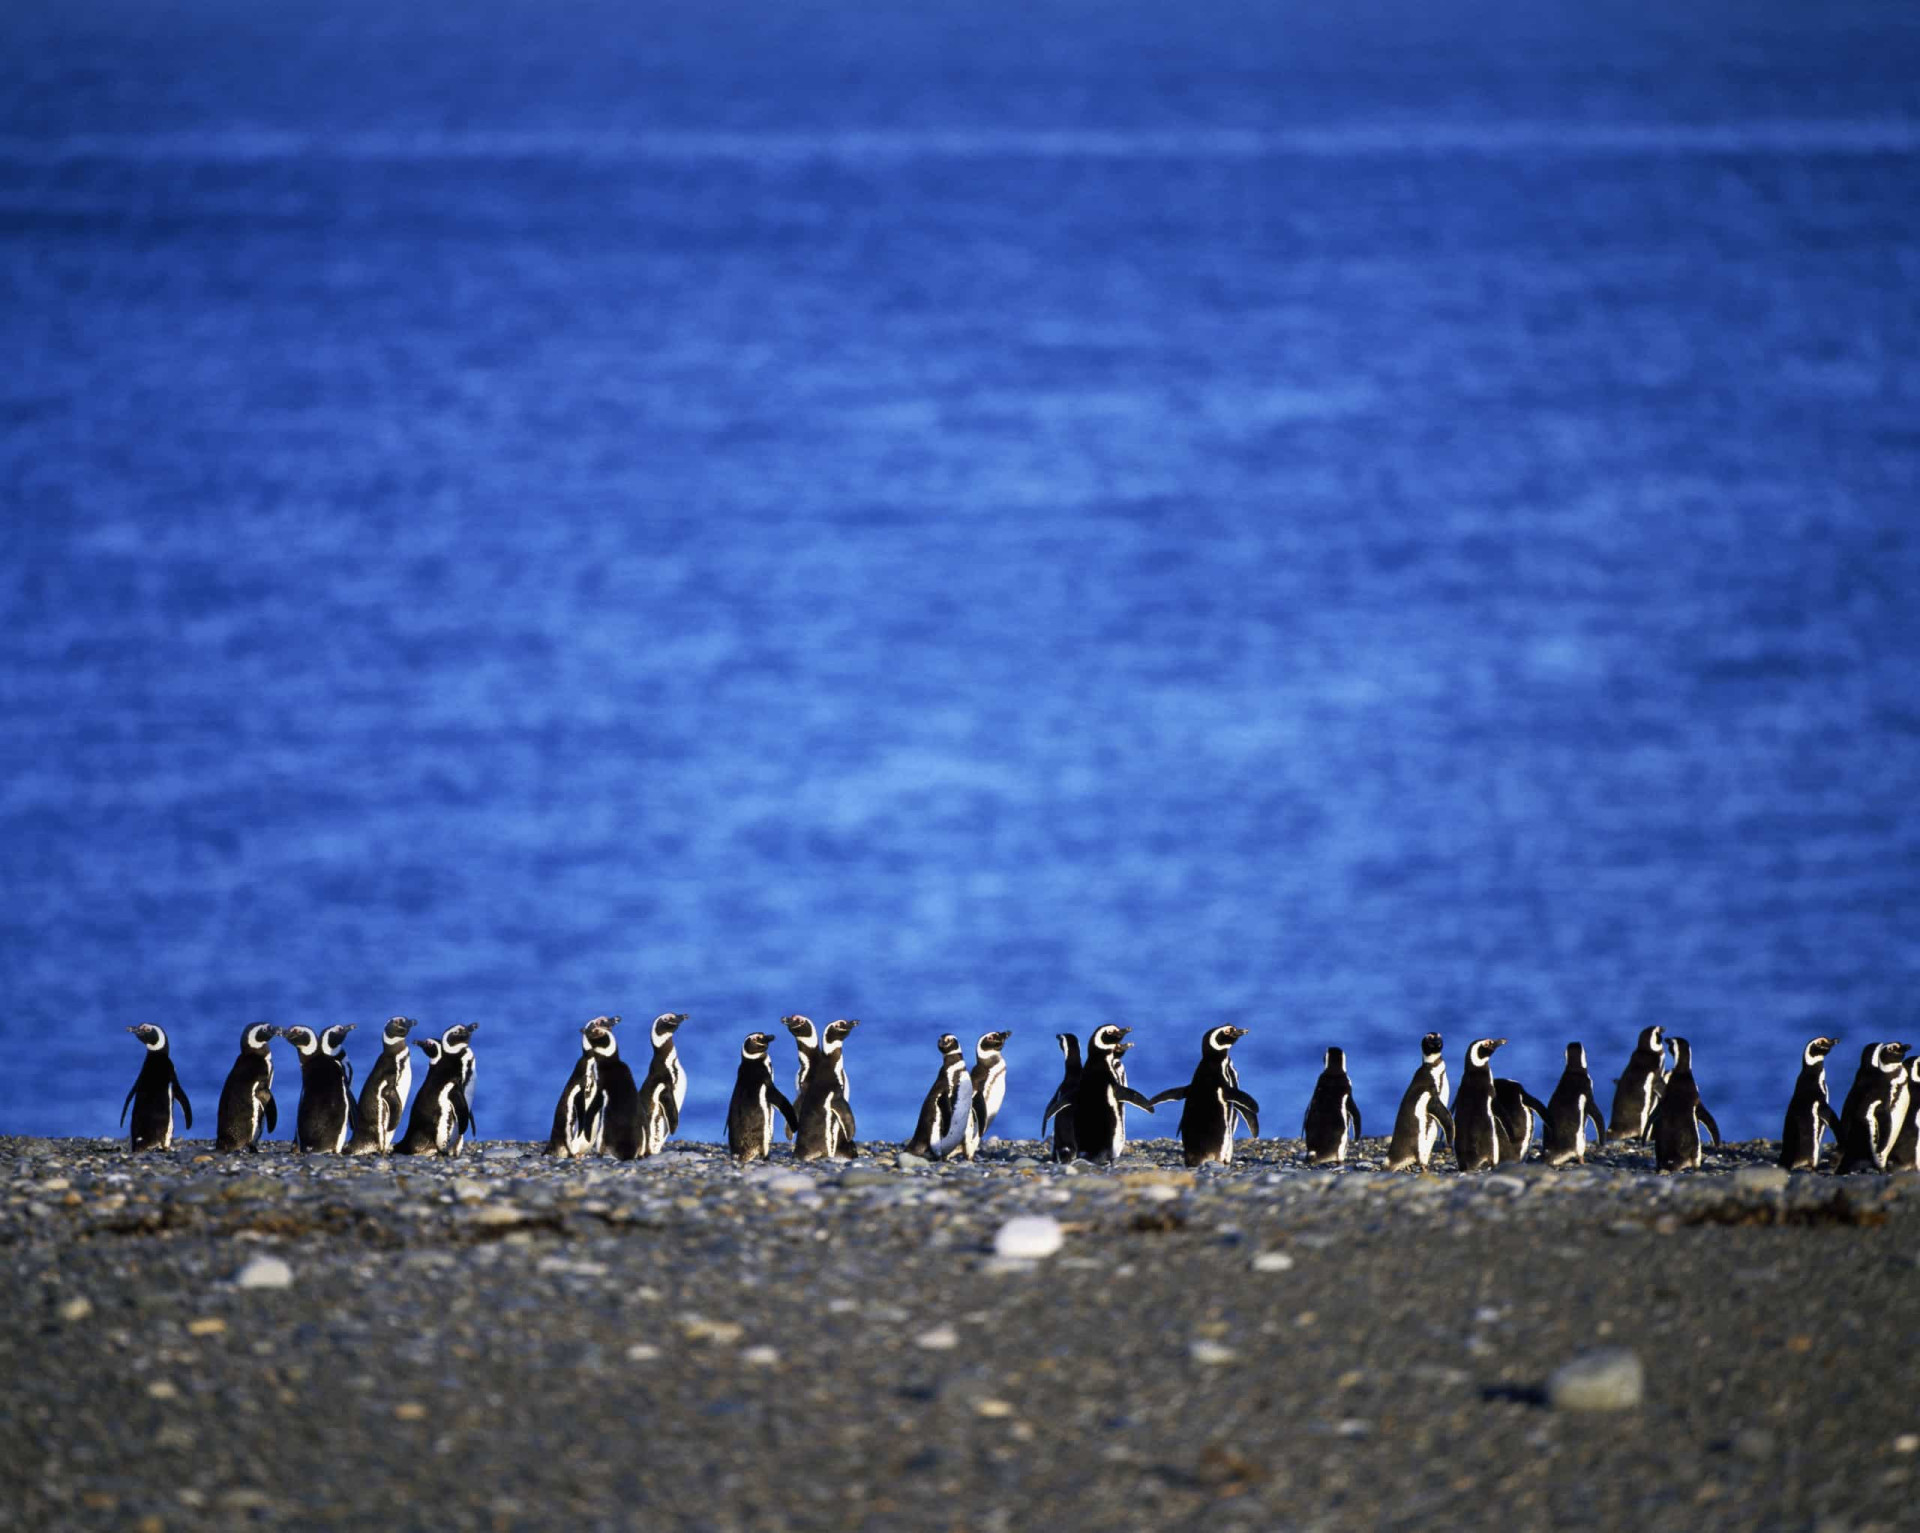 As you may have guessed, these critters are named after <a href="https://www.starsinsider.com/lifestyle/263541/the-fascinating-history-of-the-portuguese-era-of-exploration" rel="noopener">Ferdinand Magellan</a>. Fun fact: these penguins only mate with one penguin for their whole life.<p>You may also like:<a href="https://www.starsinsider.com/n/451235?utm_source=msn.com&utm_medium=display&utm_campaign=referral_description&utm_content=463556v2en-us"> The strangest royal wedding gifts ever received</a></p>